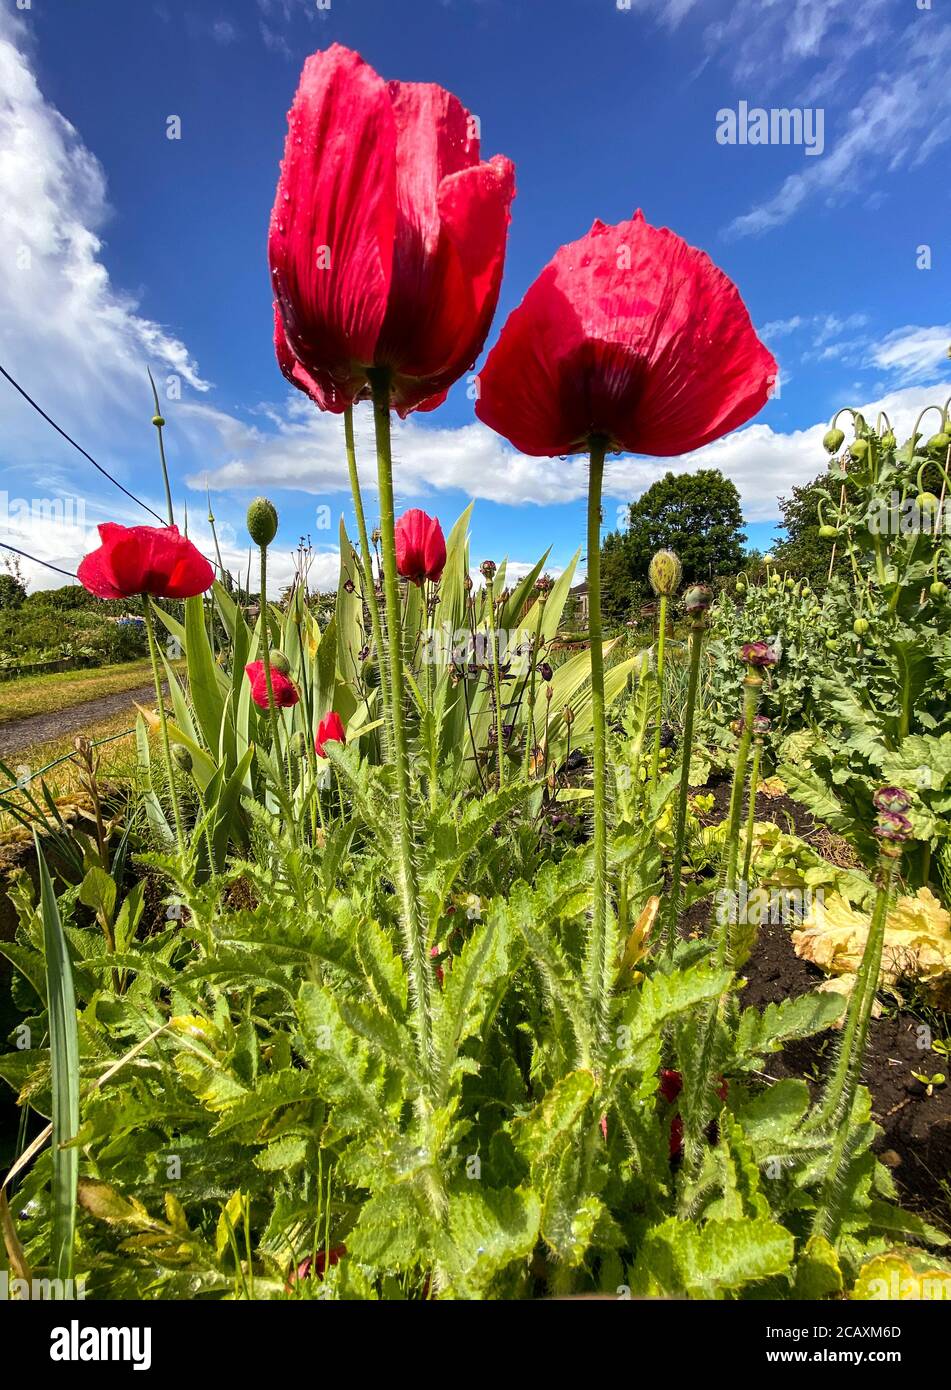 Flowers of red poppies growing in UK allotment Stock Photo